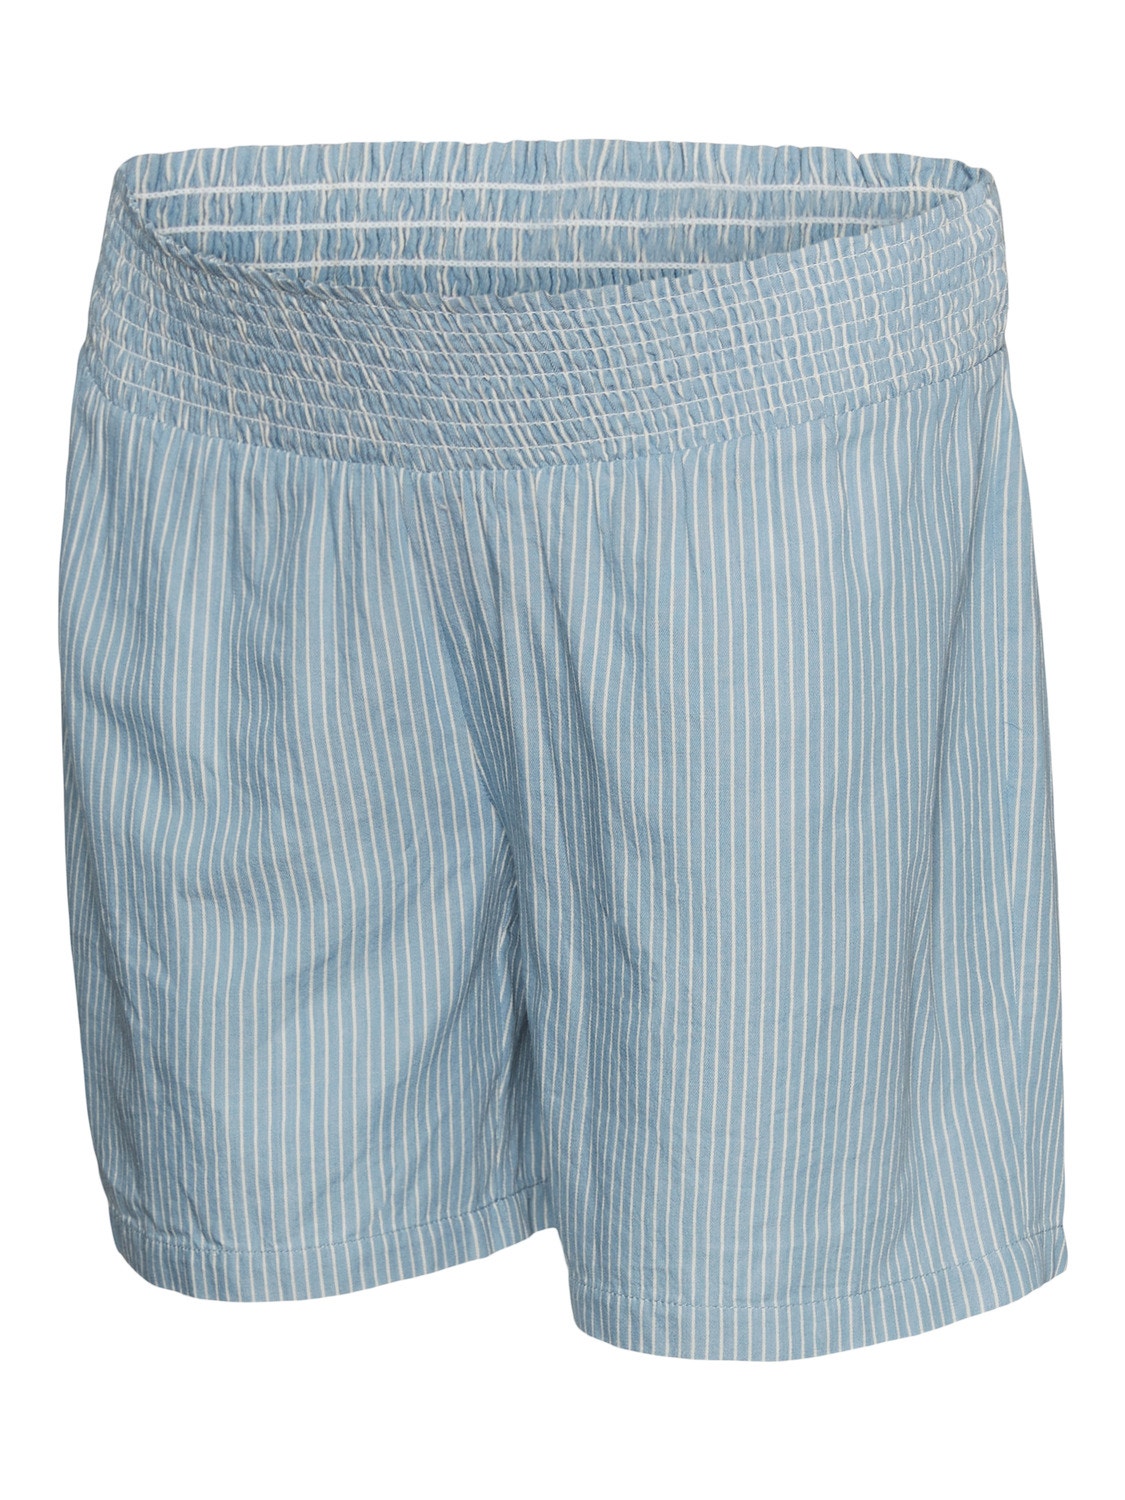 MAMA.LICIOUS Shorts Loose Fit Curve -Kentucky Blue - 20016128